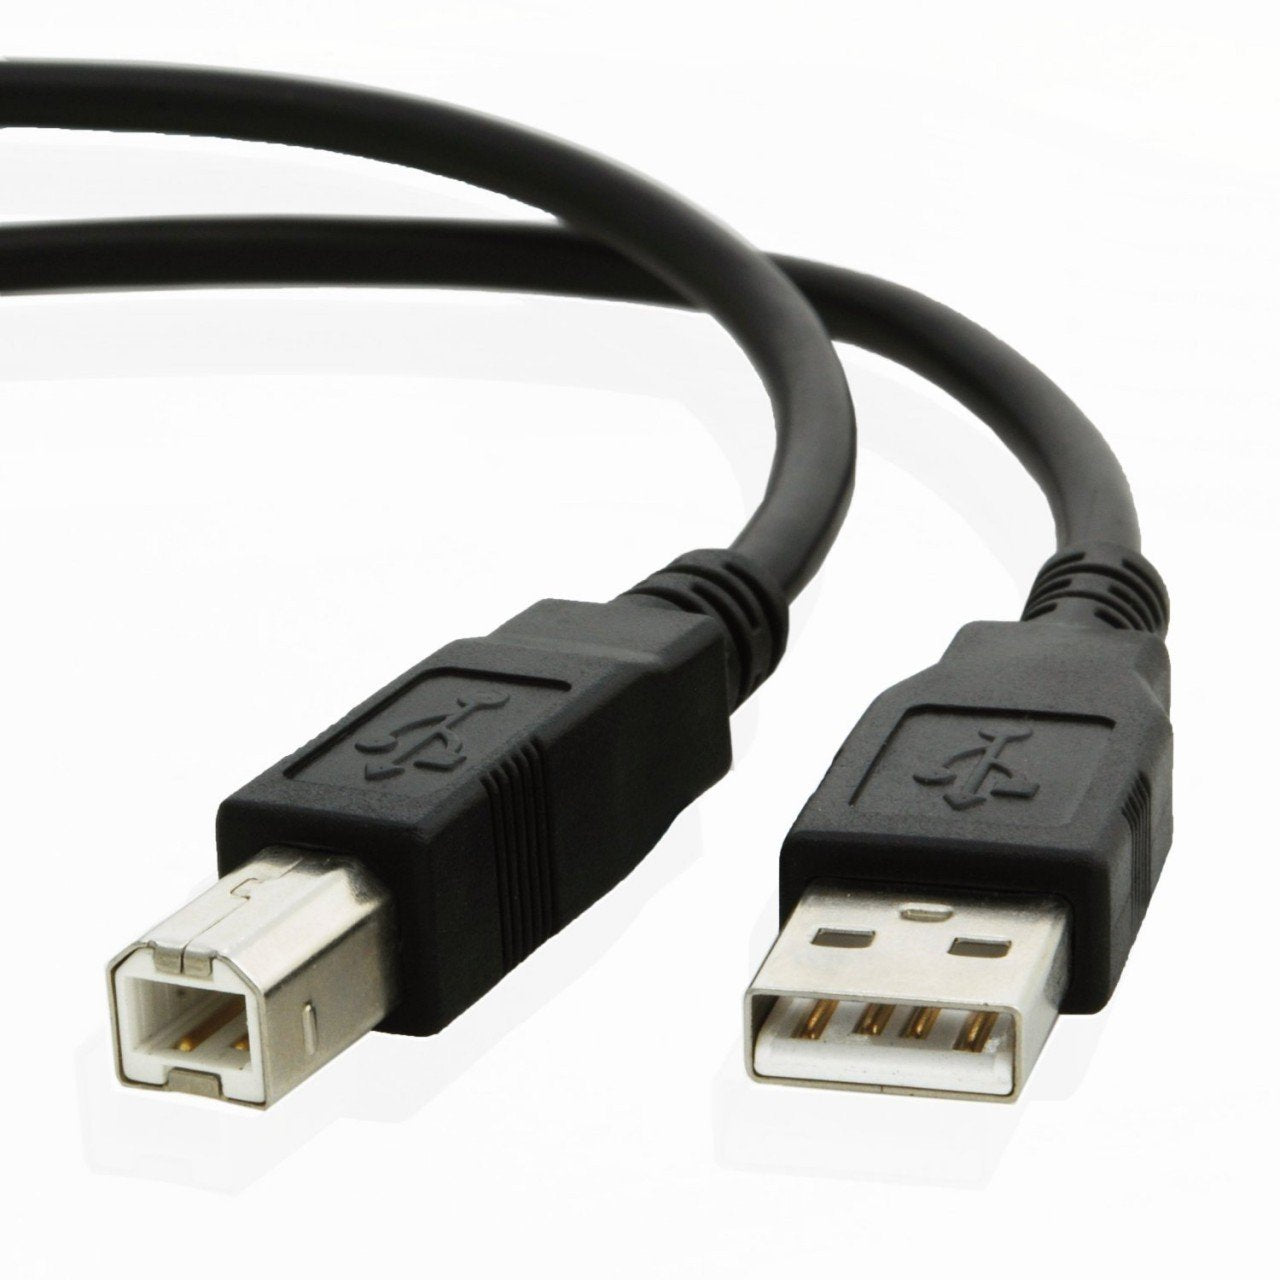 USB cable for Audio Technica AT-2020